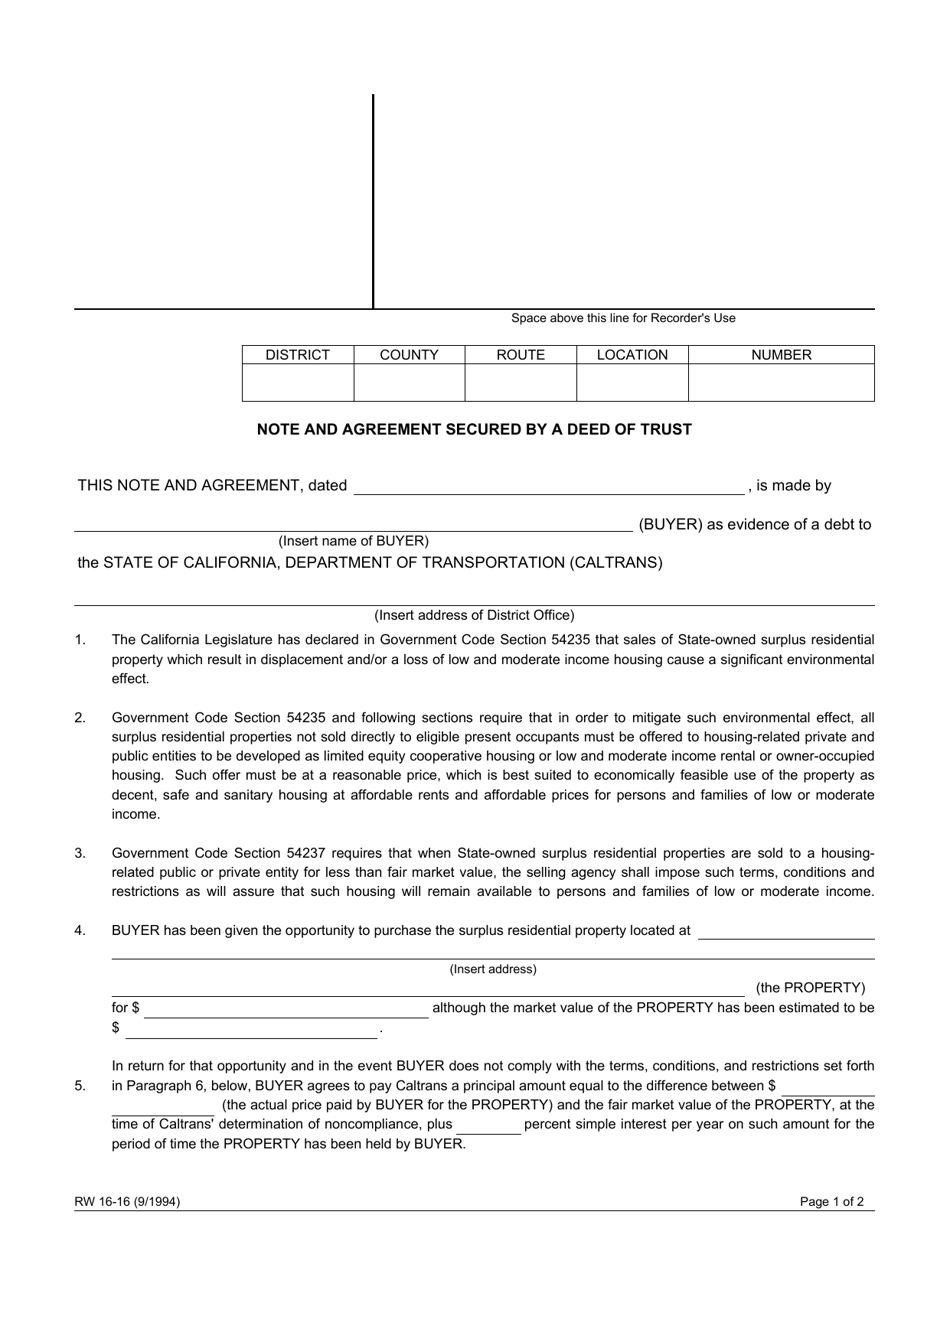 Form RW16-16 Note and Agreement Secured by a Deed of Trust - California, Page 1